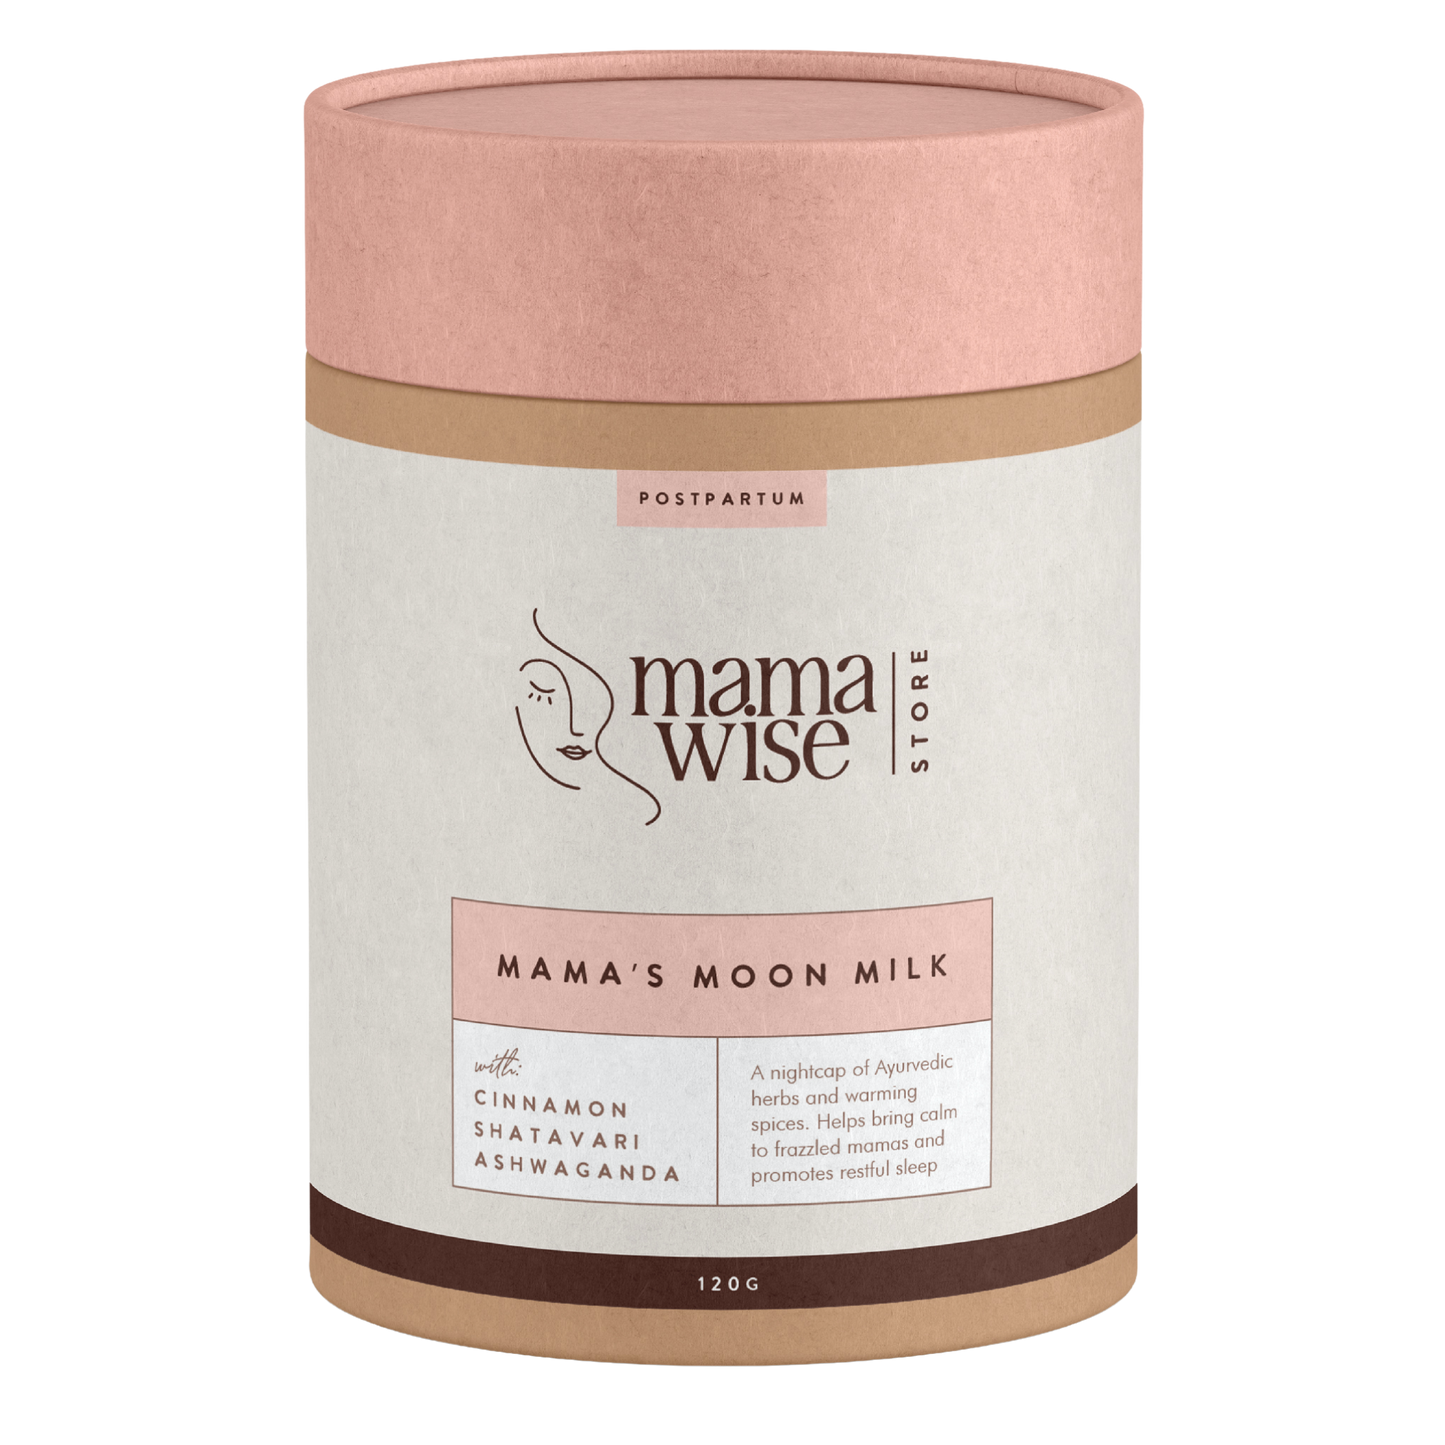 Mamawise Mama's Moon Milk Herbal Nightcap Powder Blend Canister 120gm